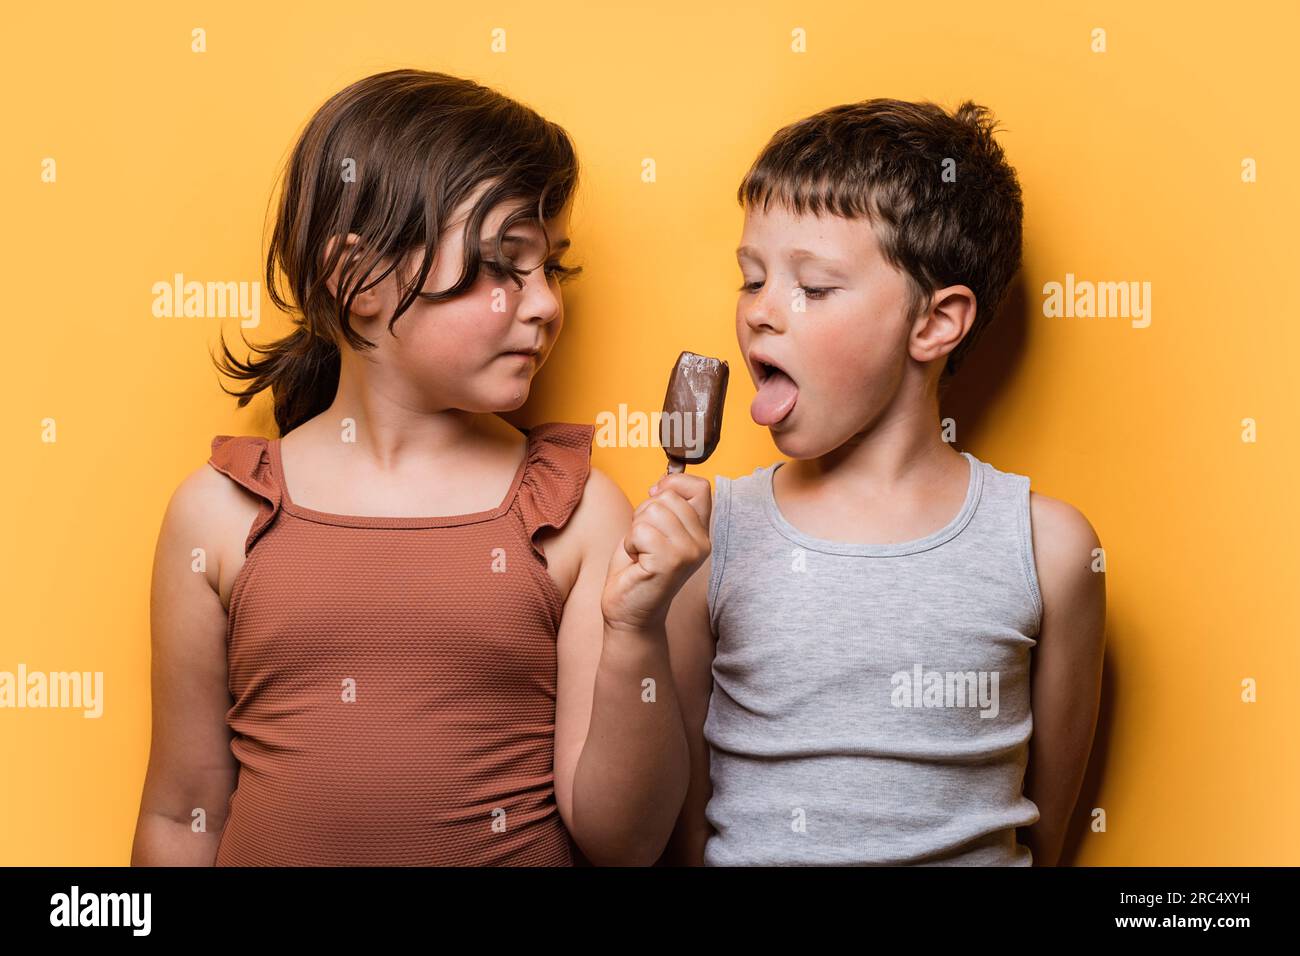 Boy licking ice cream covered in chocolate while girl in brown swimsuit sharing treat against orange background Stock Photo